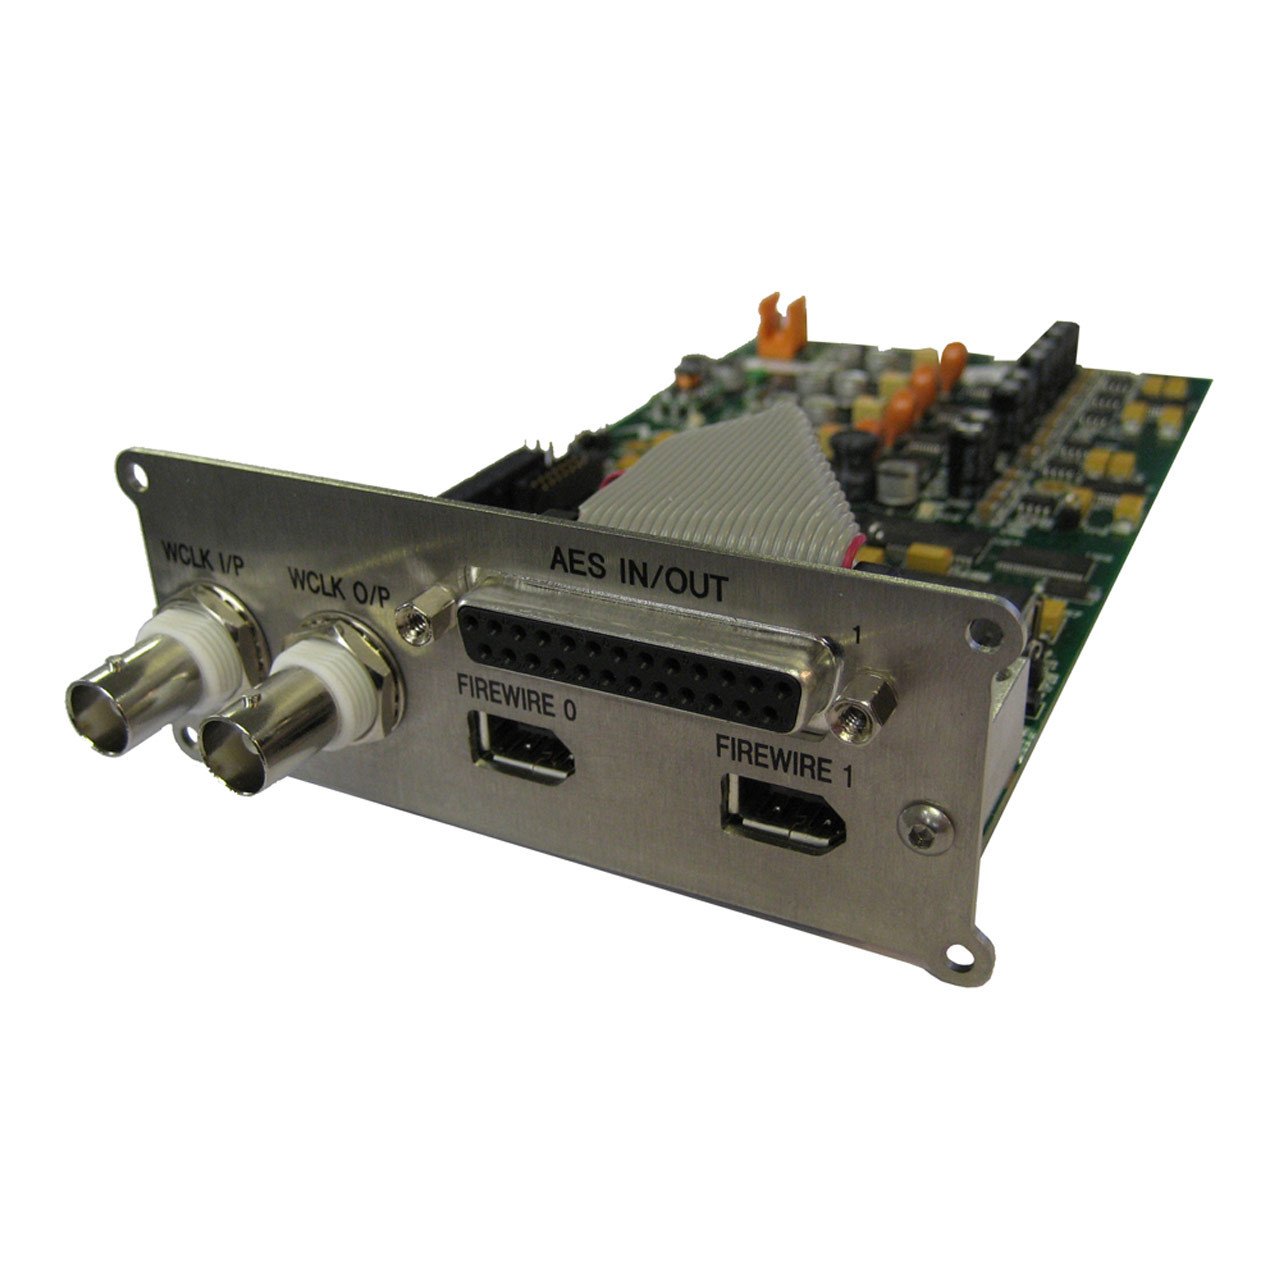 Outboard Accessories - Neve AMS 4081 Optional Digital I/O Expansion Card